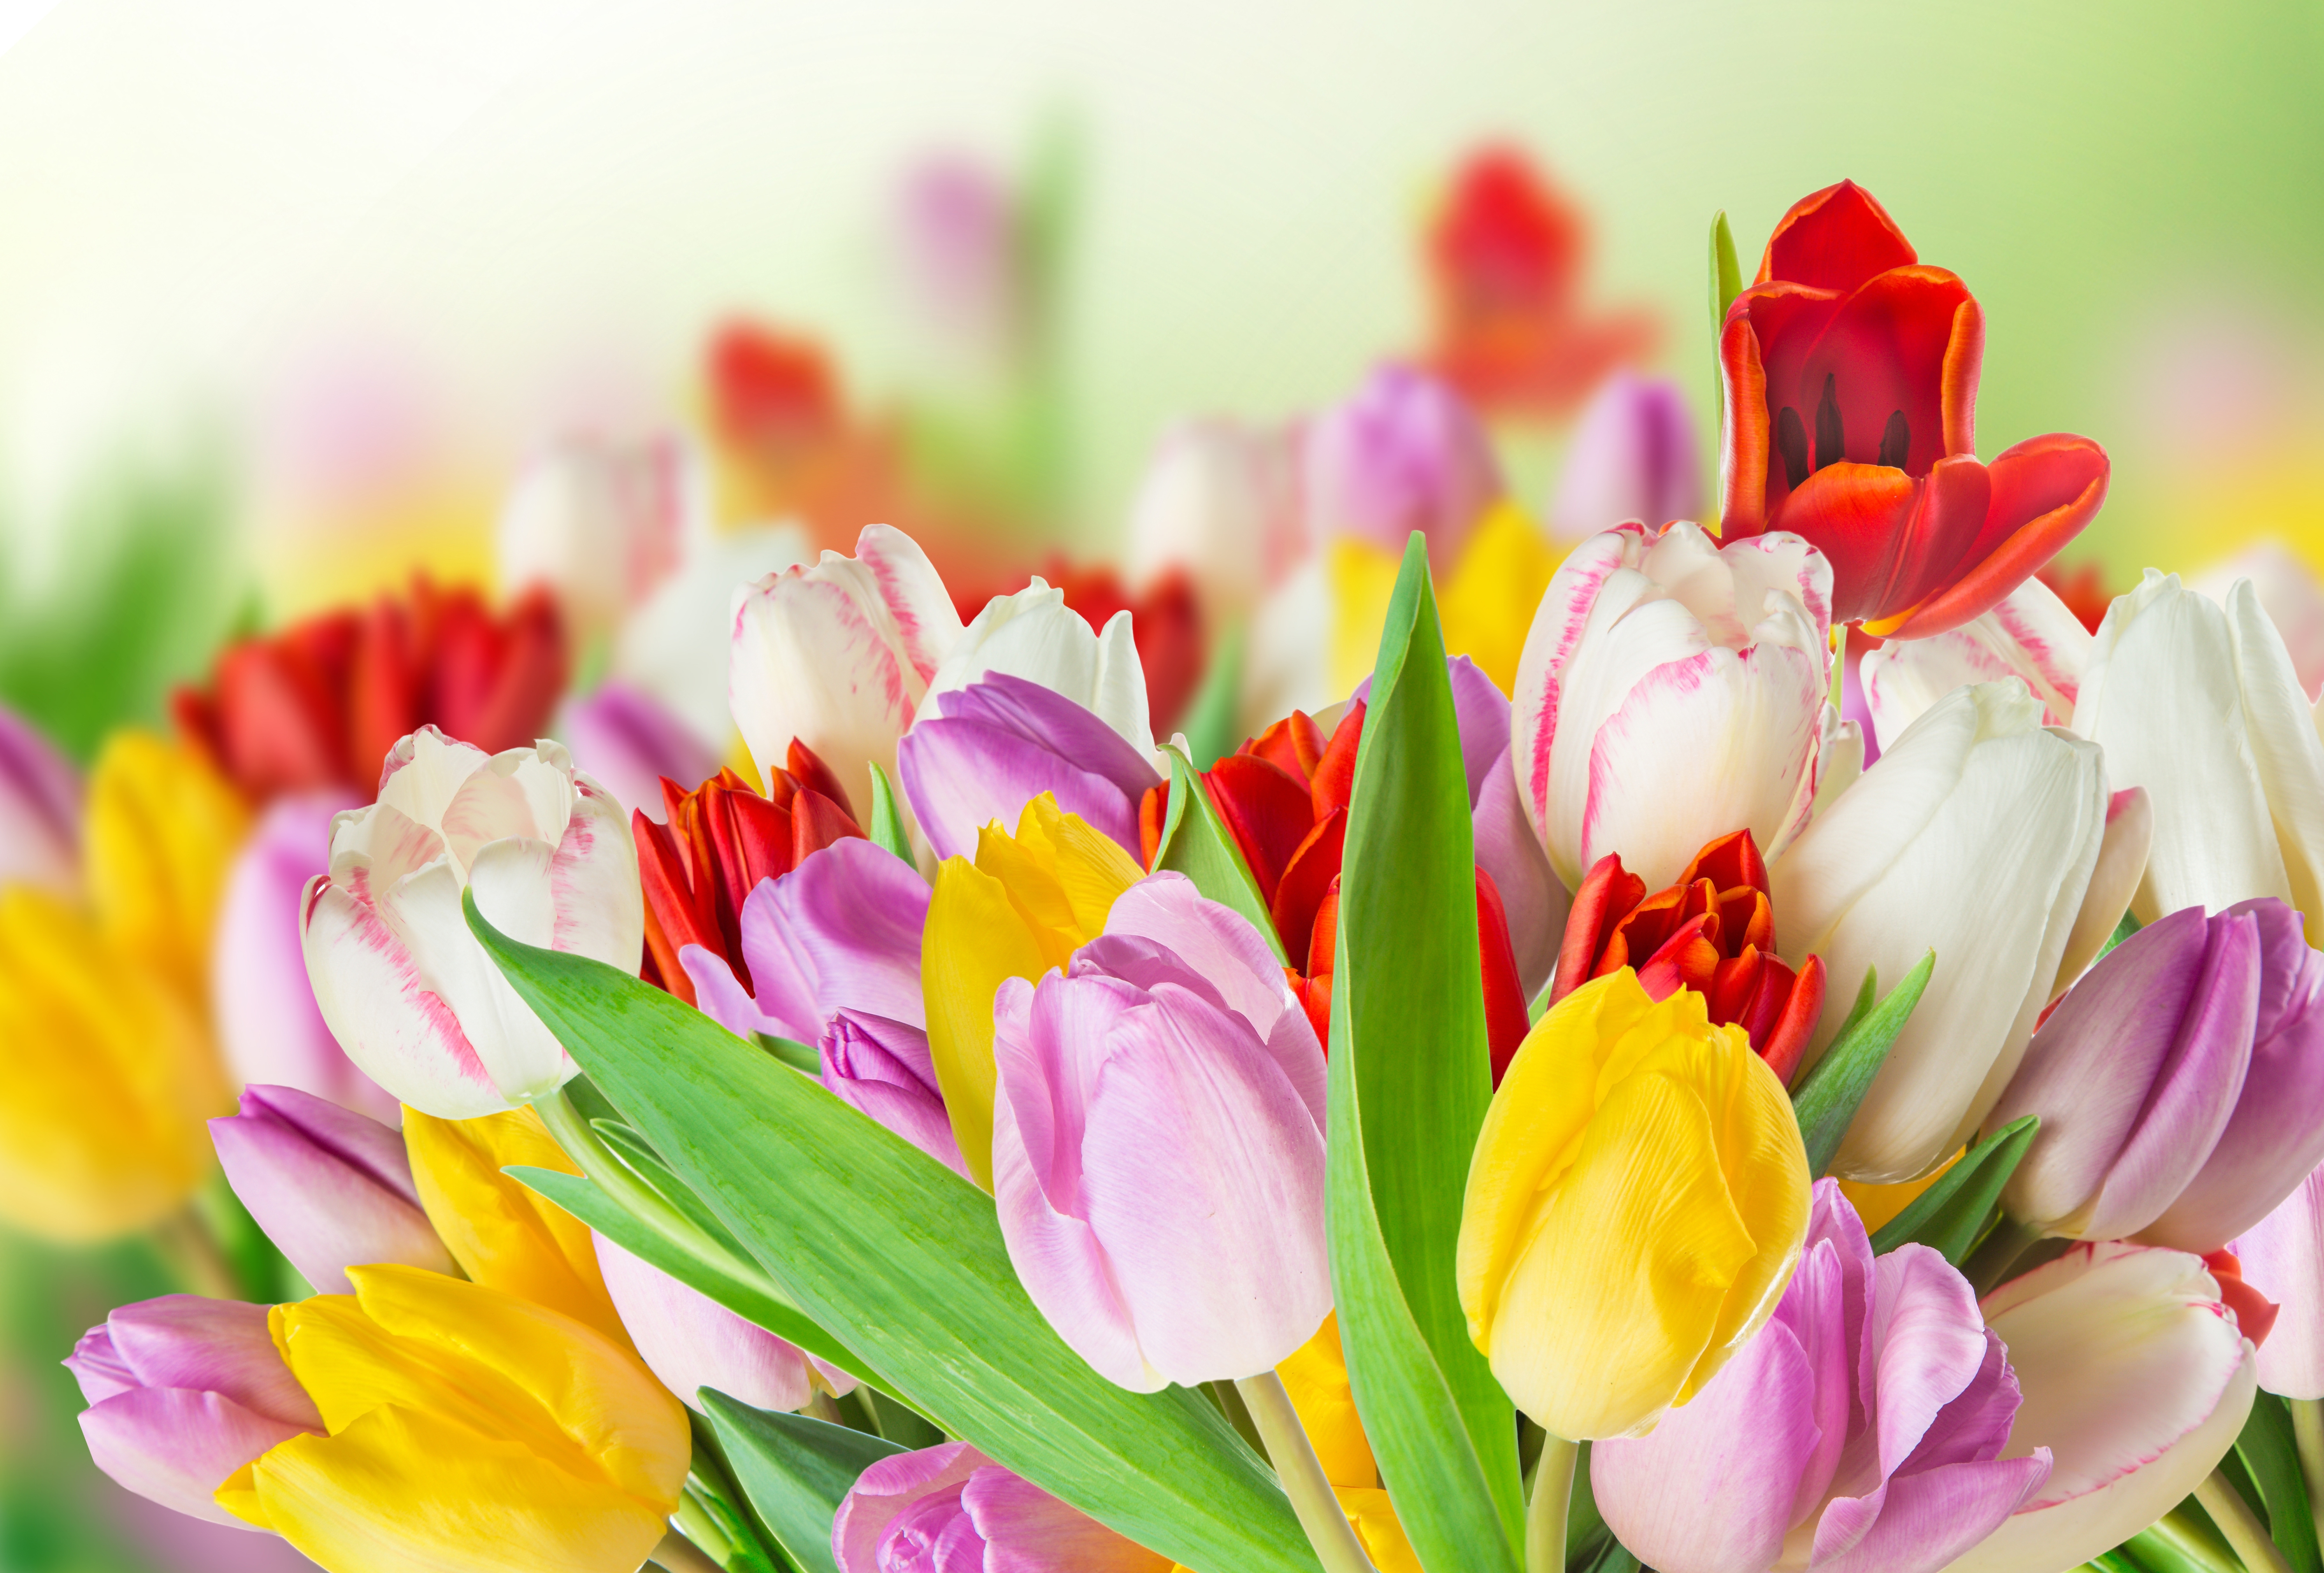 HD desktop wallpaper: Nature, Flowers, Flower, Earth, Colorful, Spring, Tulip, Yellow Flower, White Flower, Purple Flower, Red Flower download free picture